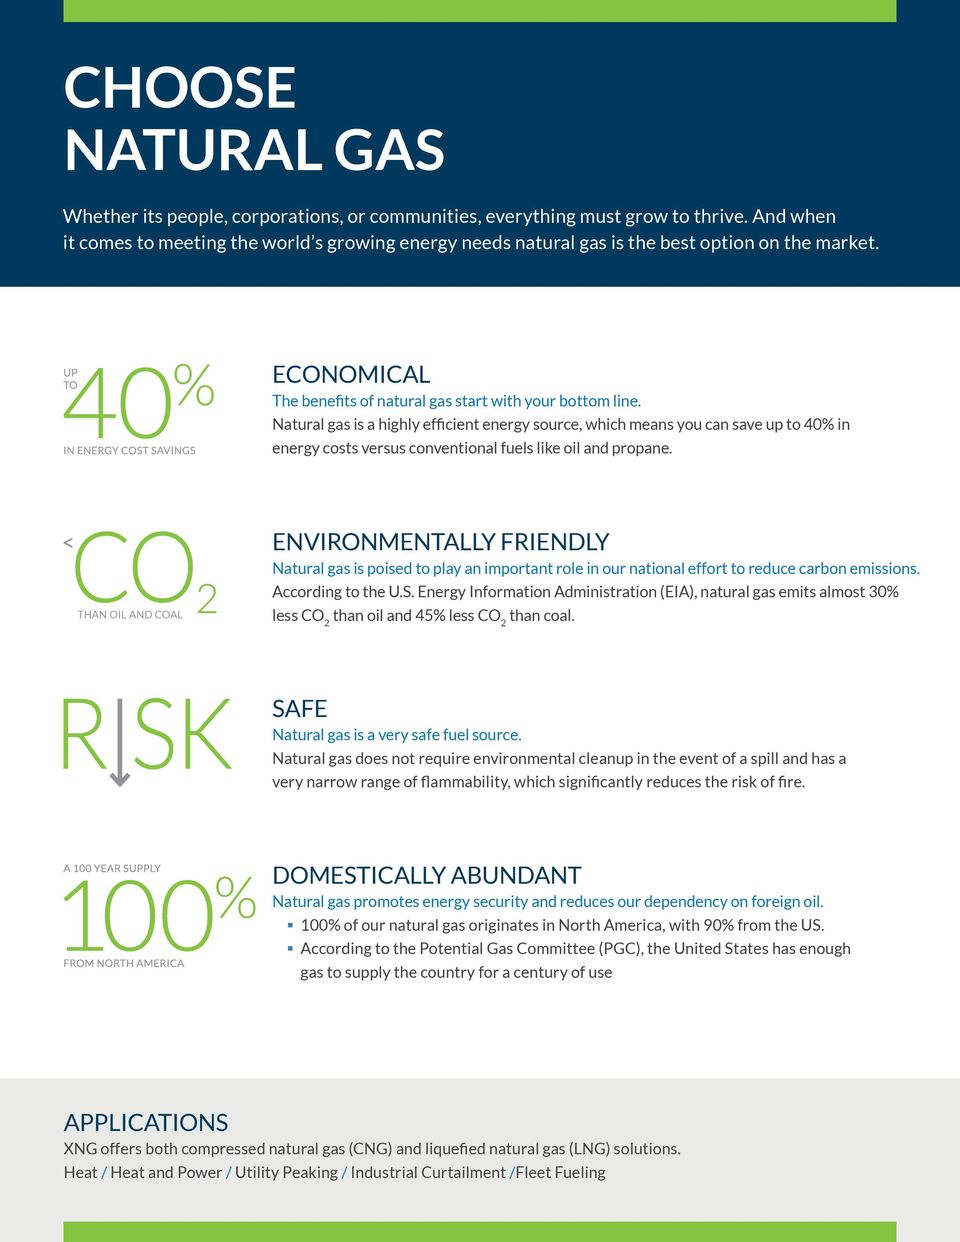 THAN OIL AND COAL ENVIRONMENTALLY FRIENDLY Natural gas is poised to play an important role in our national effort to reduce carbon emissions. less CO 2 2 than coal.